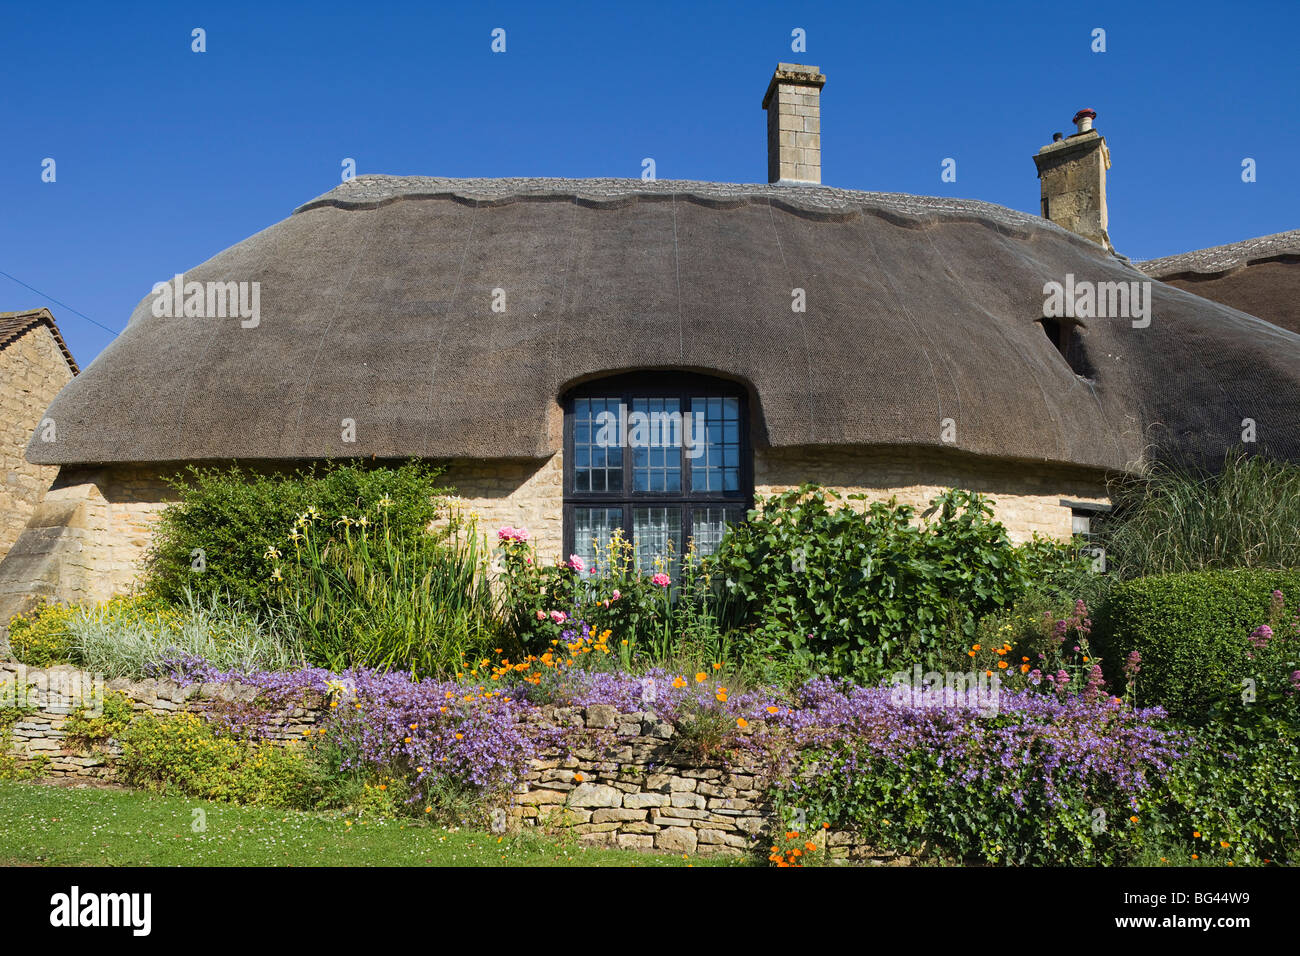 England, Gloustershire, Cotswolds, Thatched Cottage in Chipping Campden Stock Photo